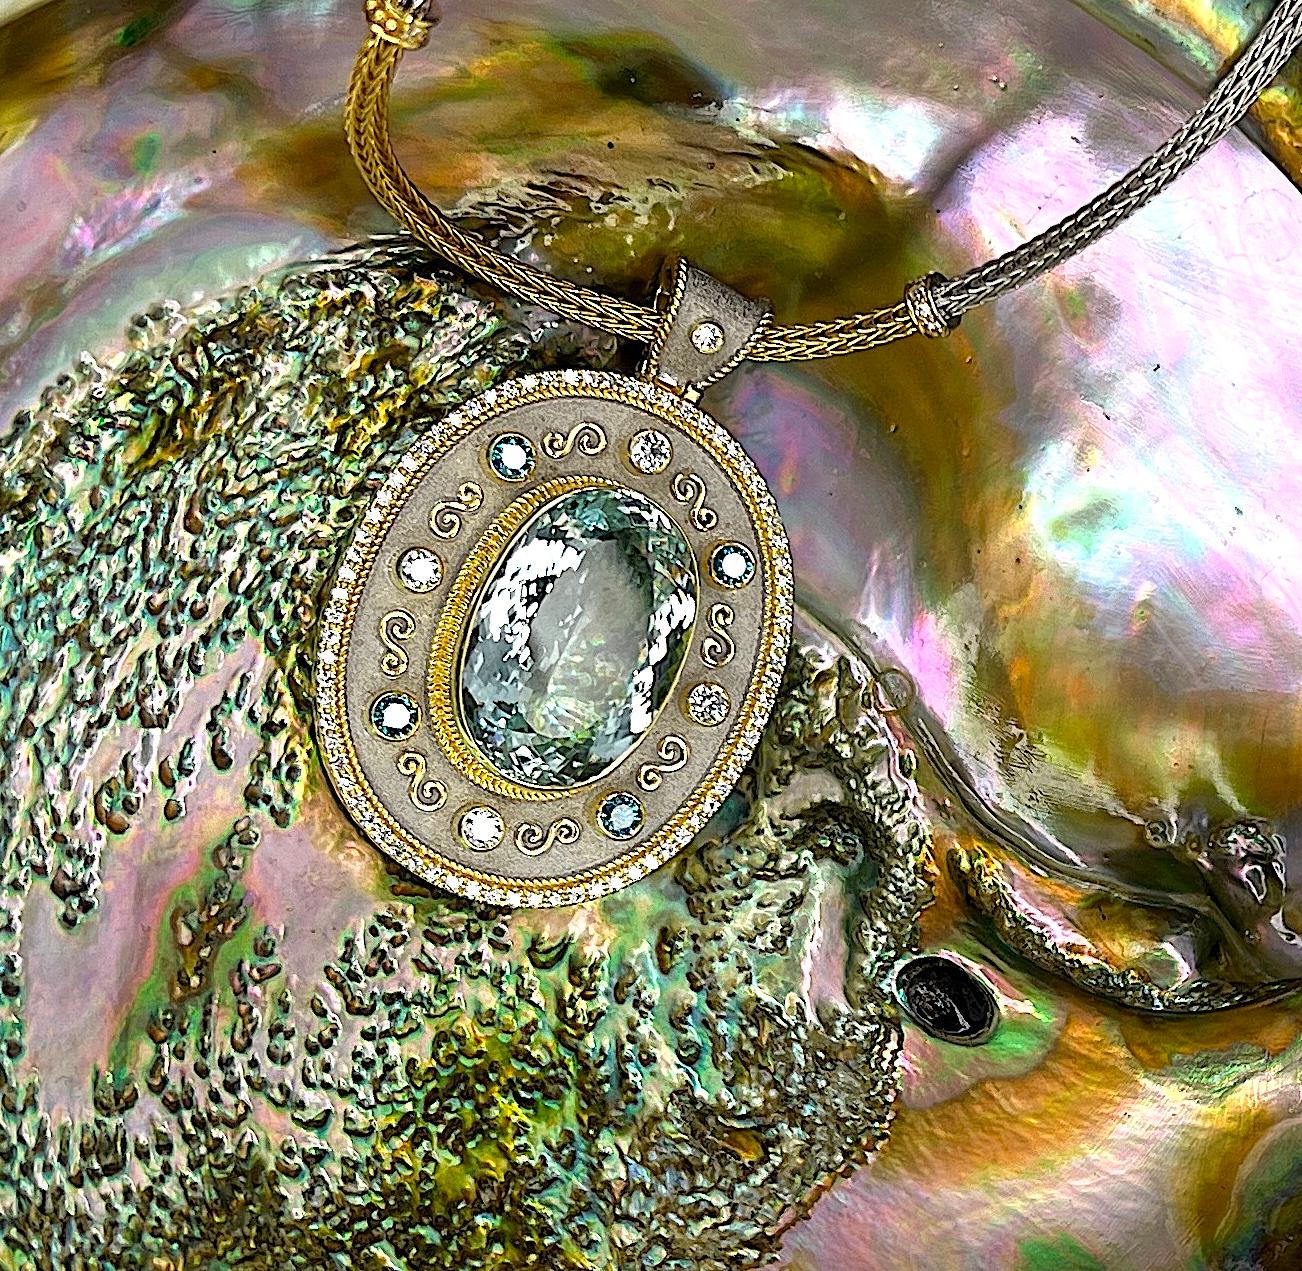 This S.Georgios designer pendant enhancer is handmade from 18 Karat yellow gold and finished with White Rhodium. It is microscopically decorated with granulation work - twisted wires on a gorgeous and unique velvet background. This pendant enhancer